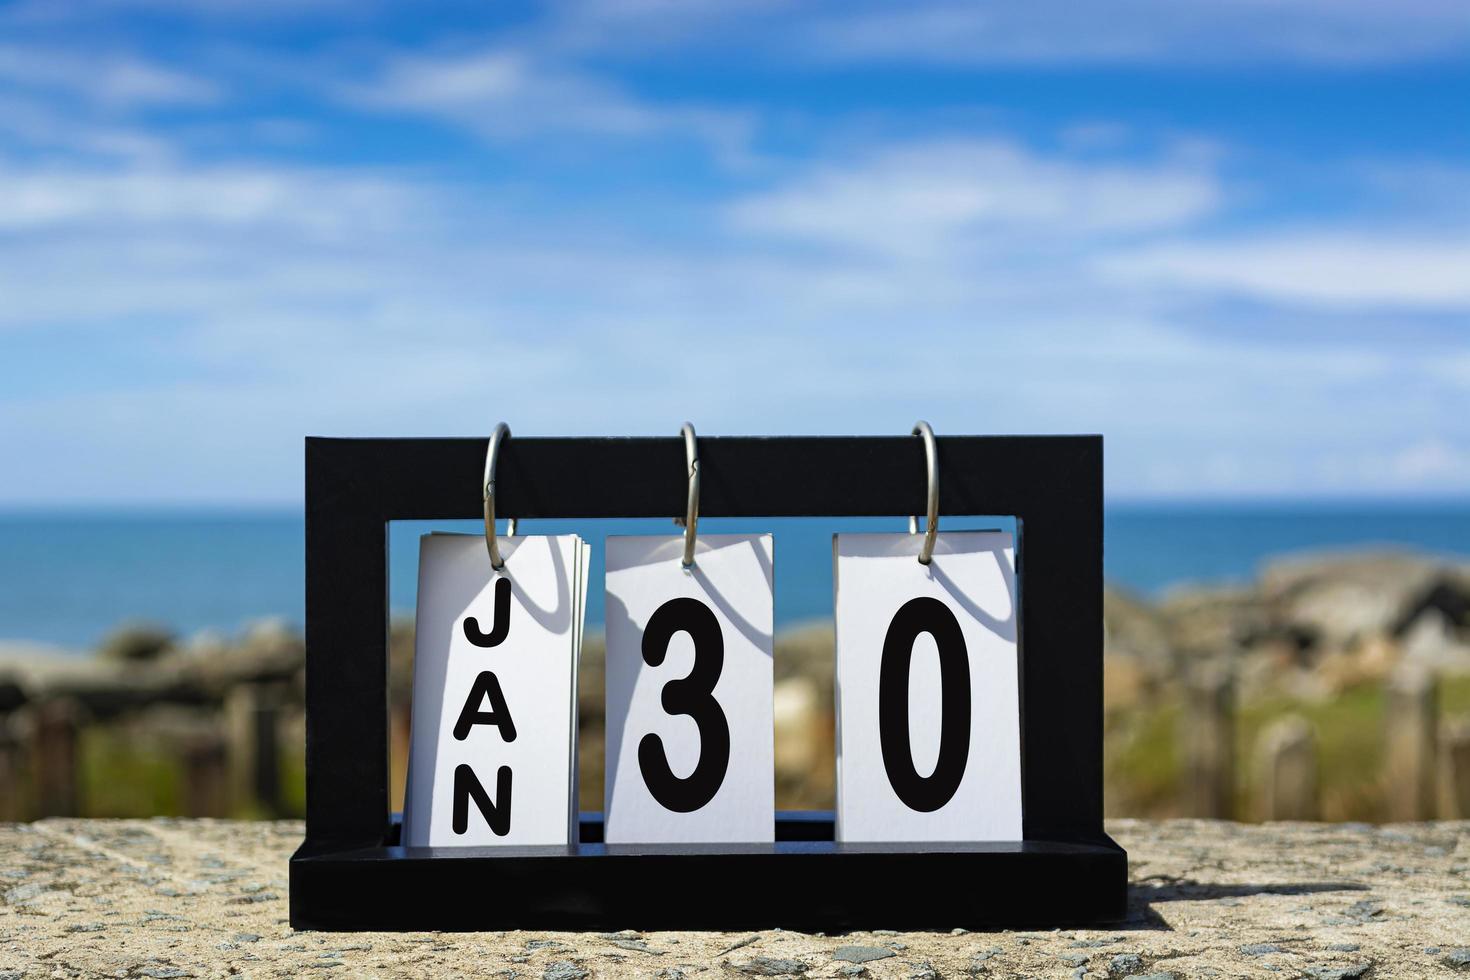 Jan 30 calendar date text on wooden frame with blurred background of ocean photo